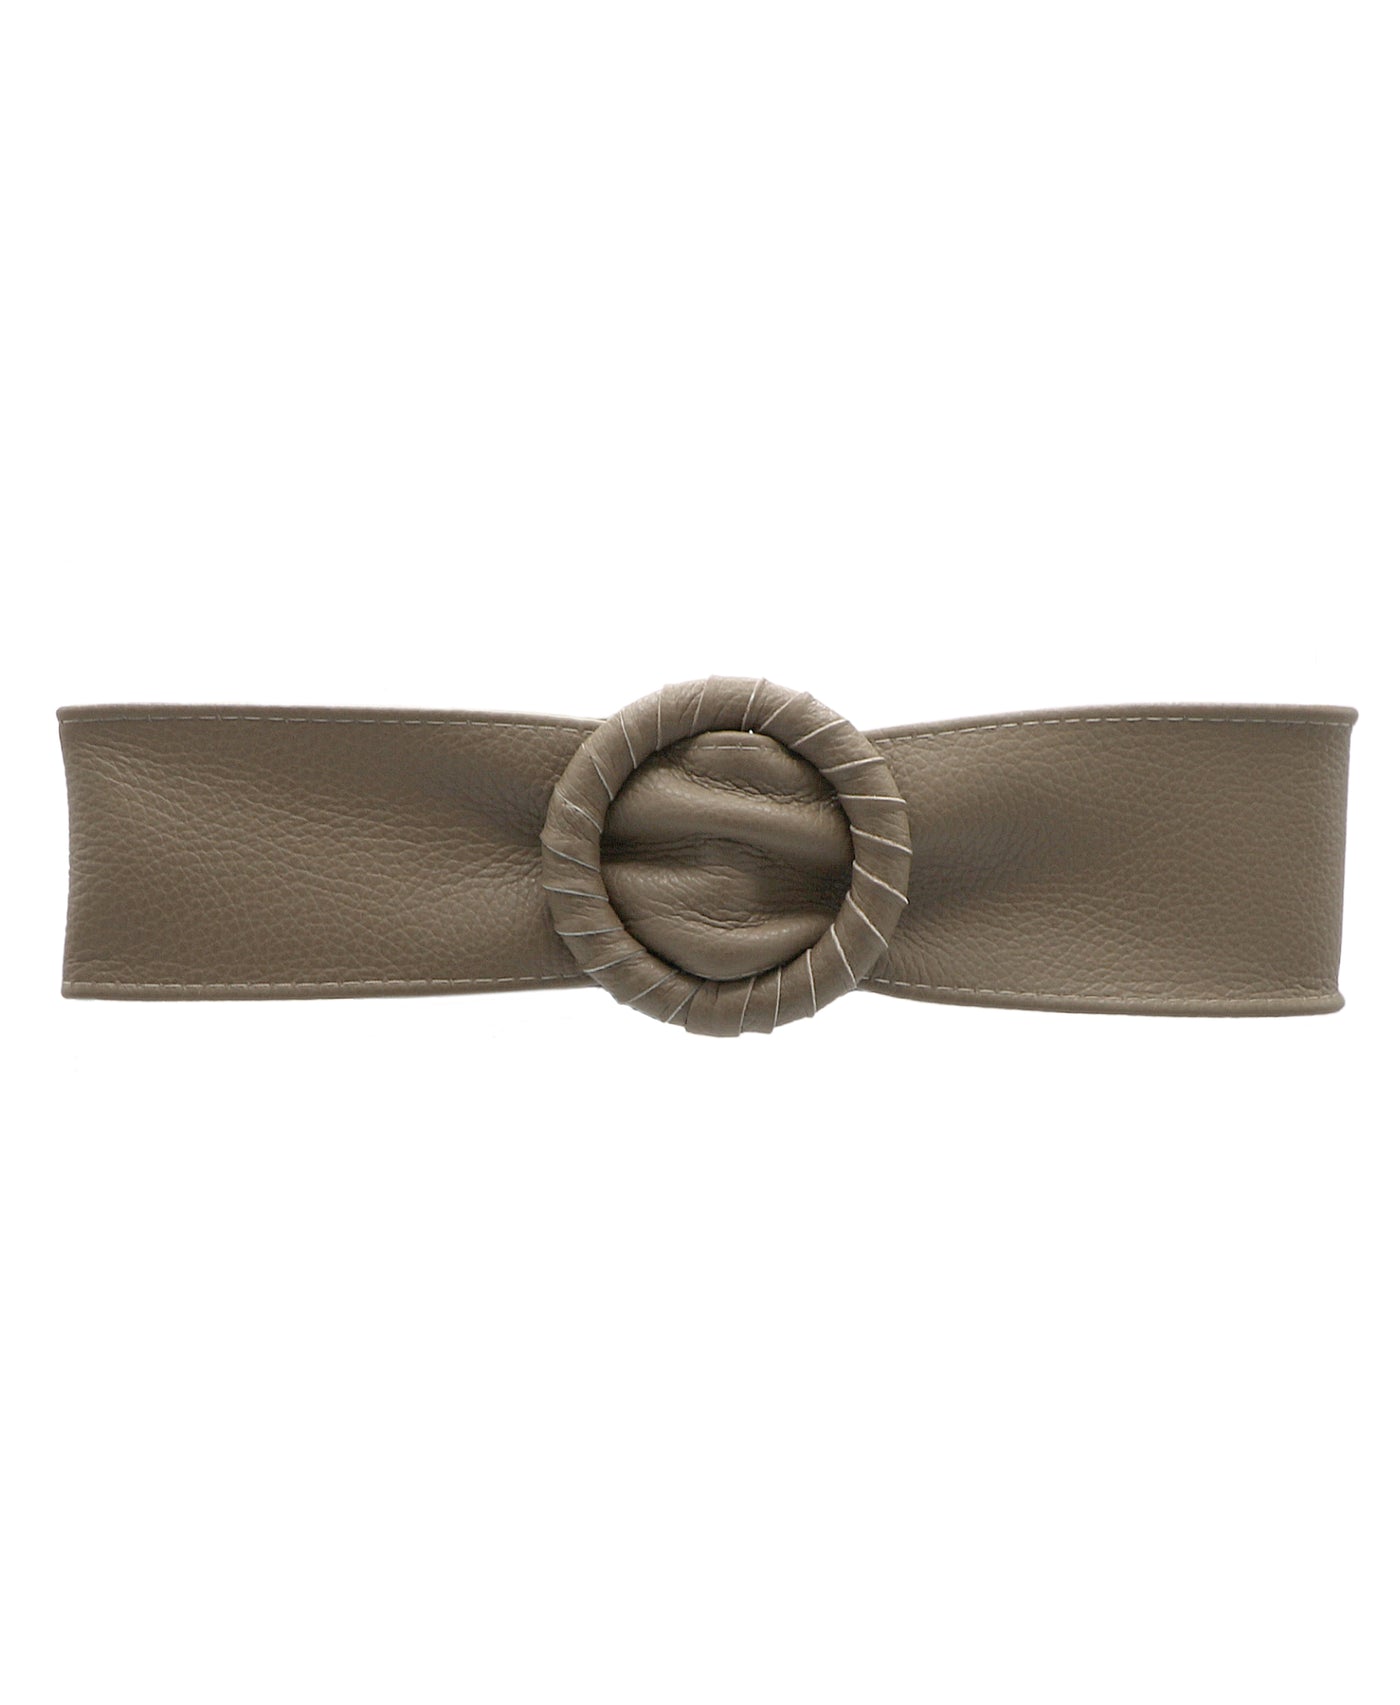 Leather Belt w/ Round Wrapped Buckle image 1